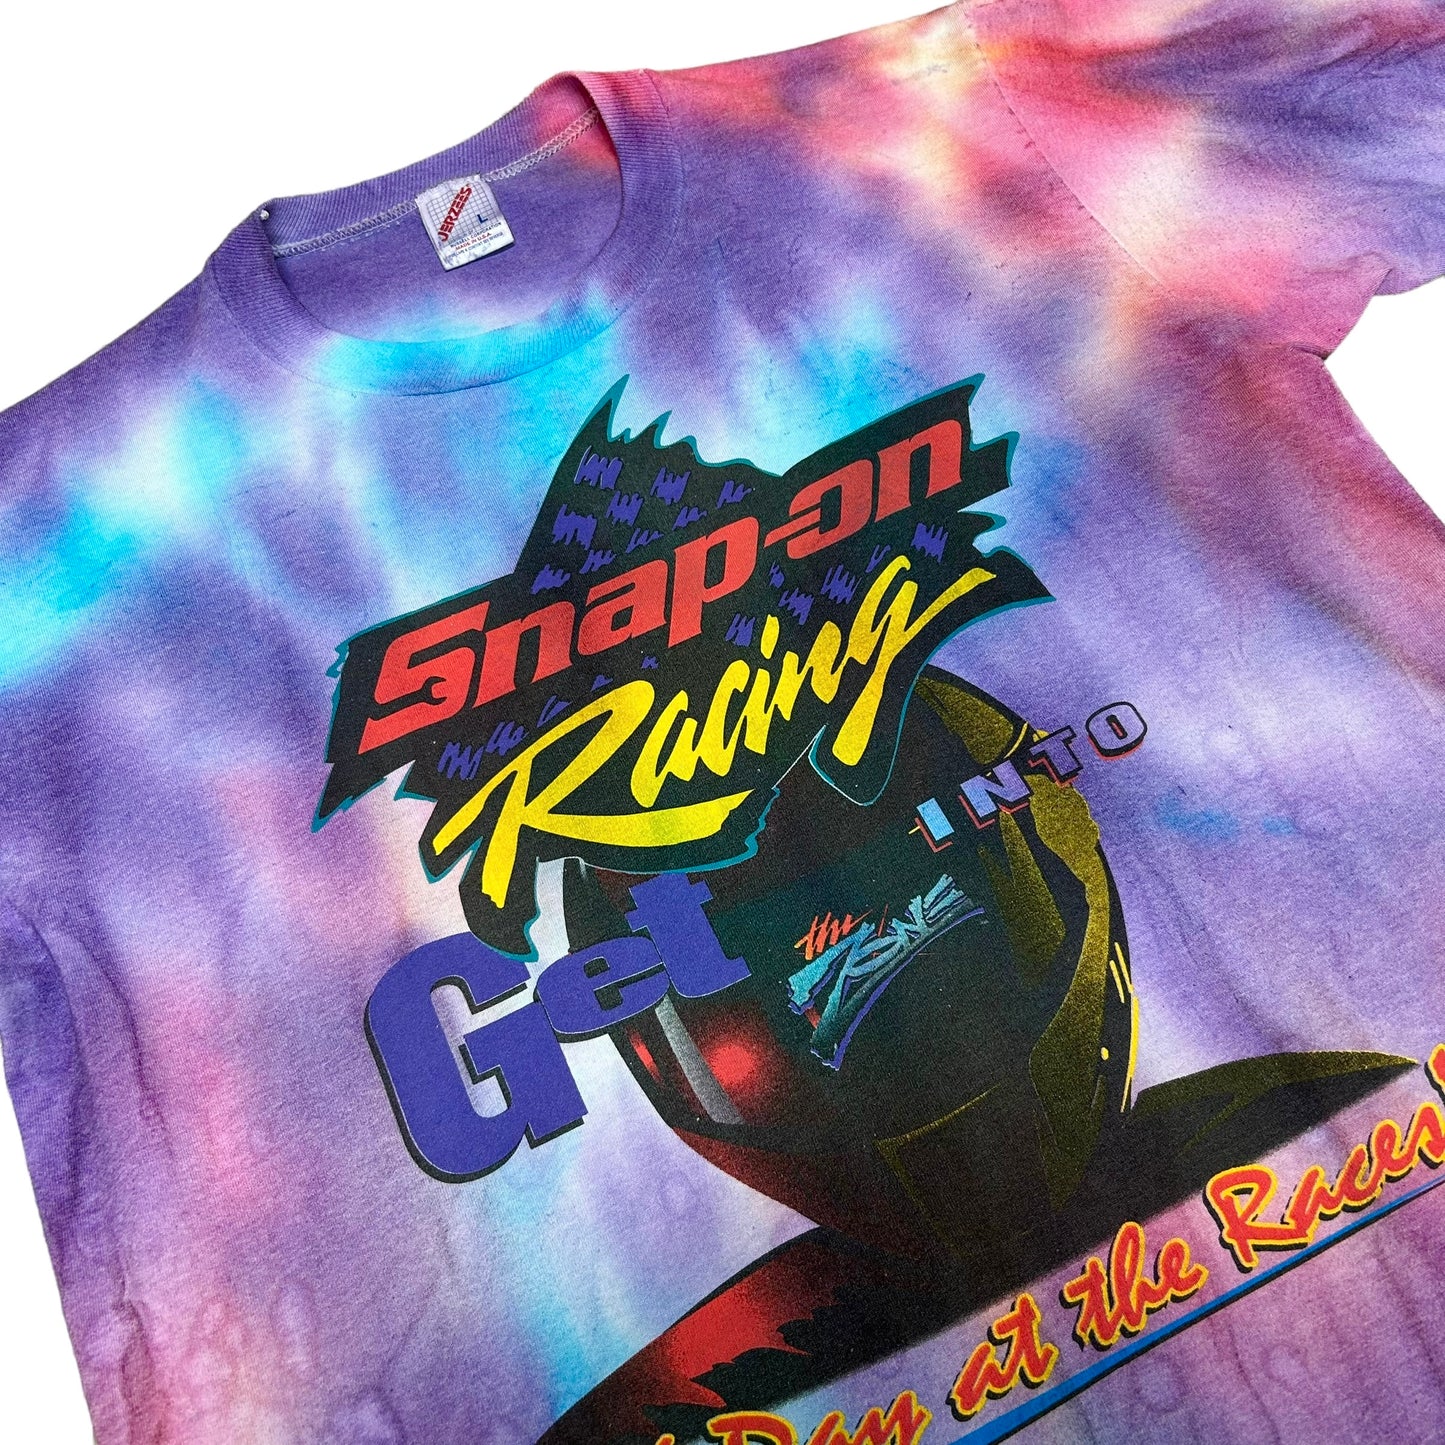 Vintage 1990s Snap-On Racing “Get Into The Zone” Tie-Dye Graphic T-Shirt - Size Large